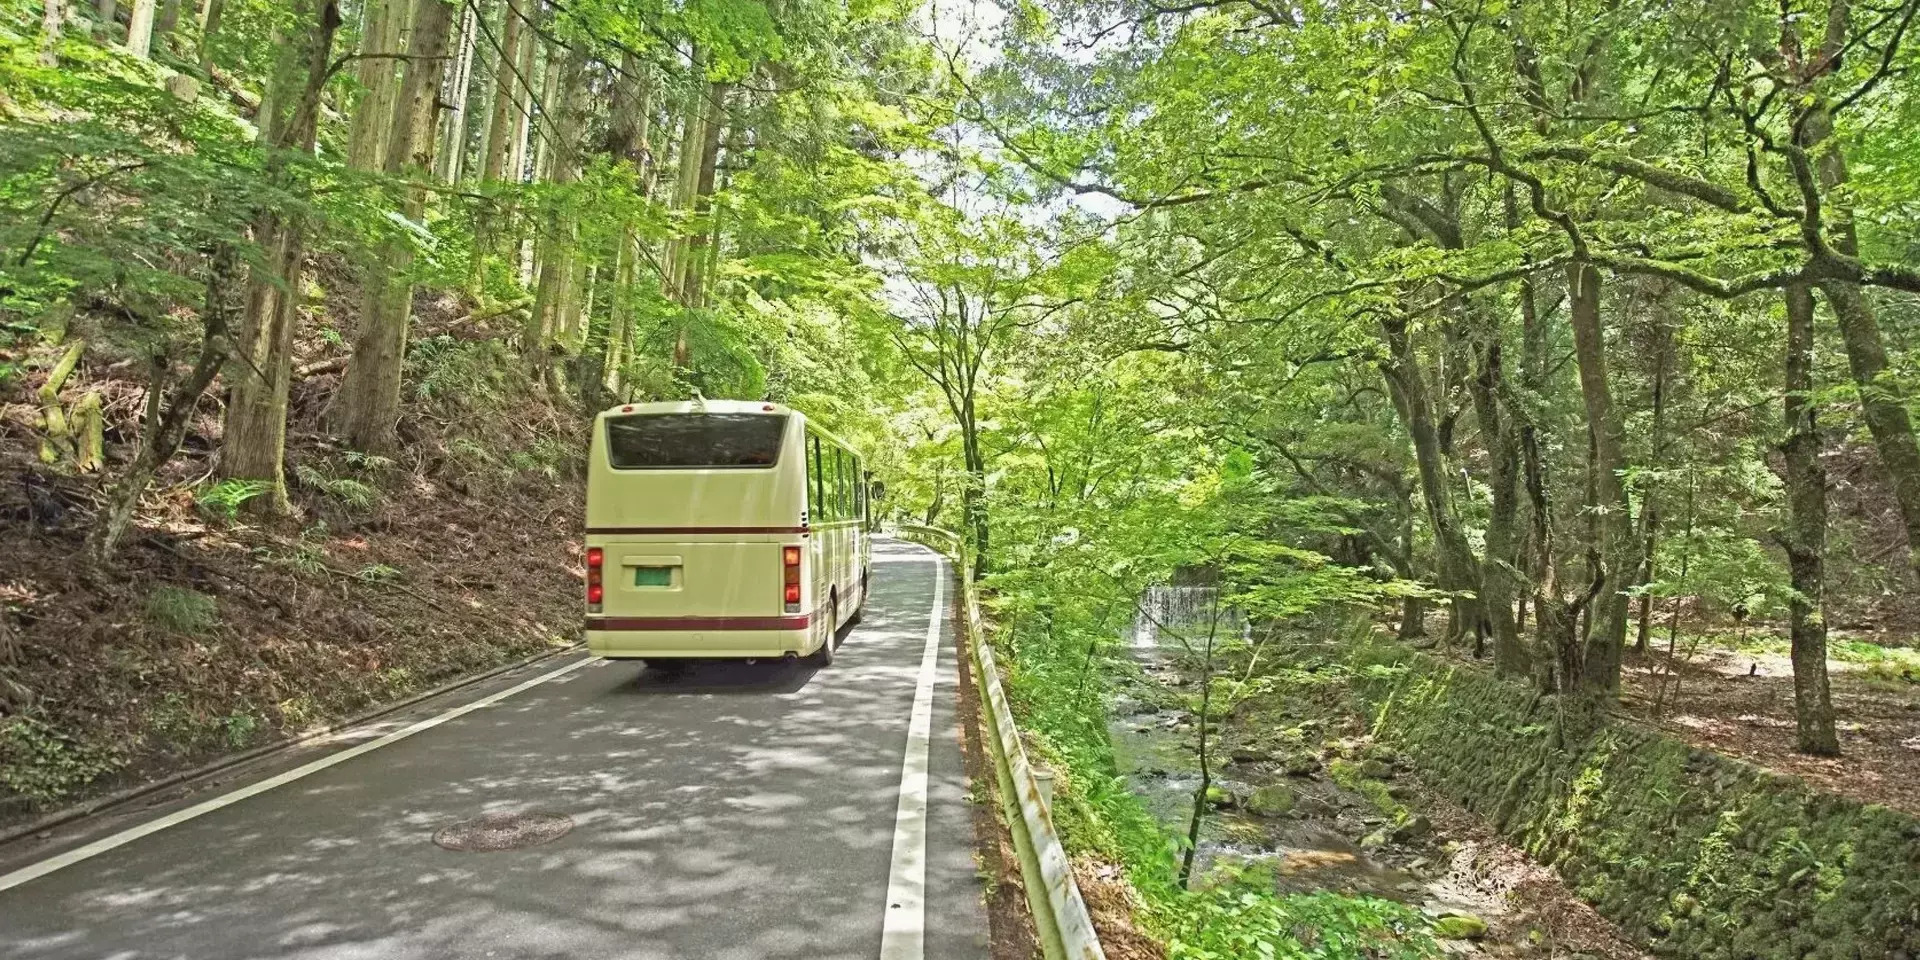 a yellow bus driving through a forest road